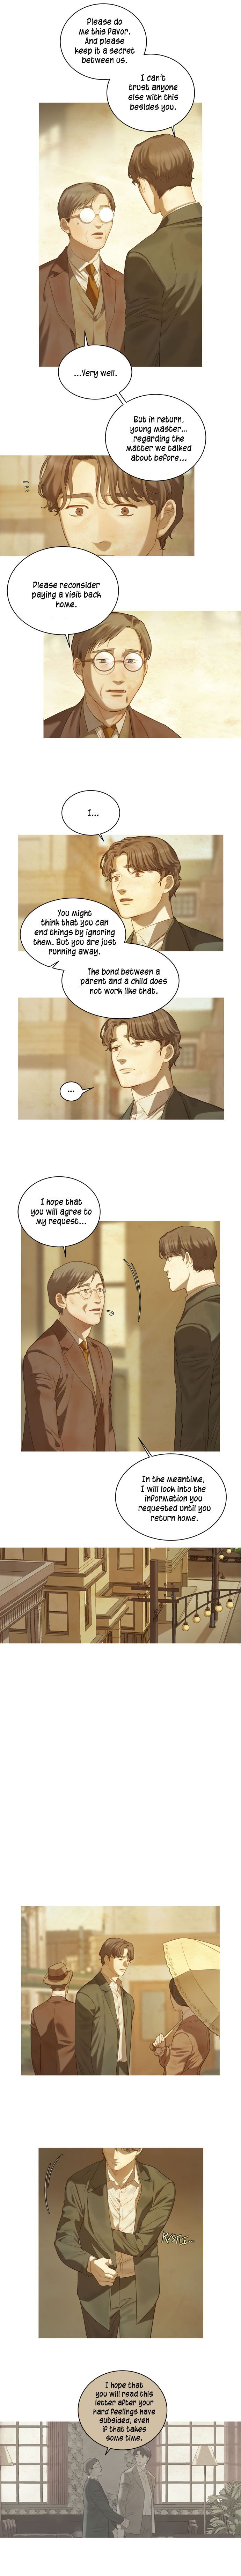 Gorae Byul - The Gyeongseong Mermaid - Chapter 21 Page 7